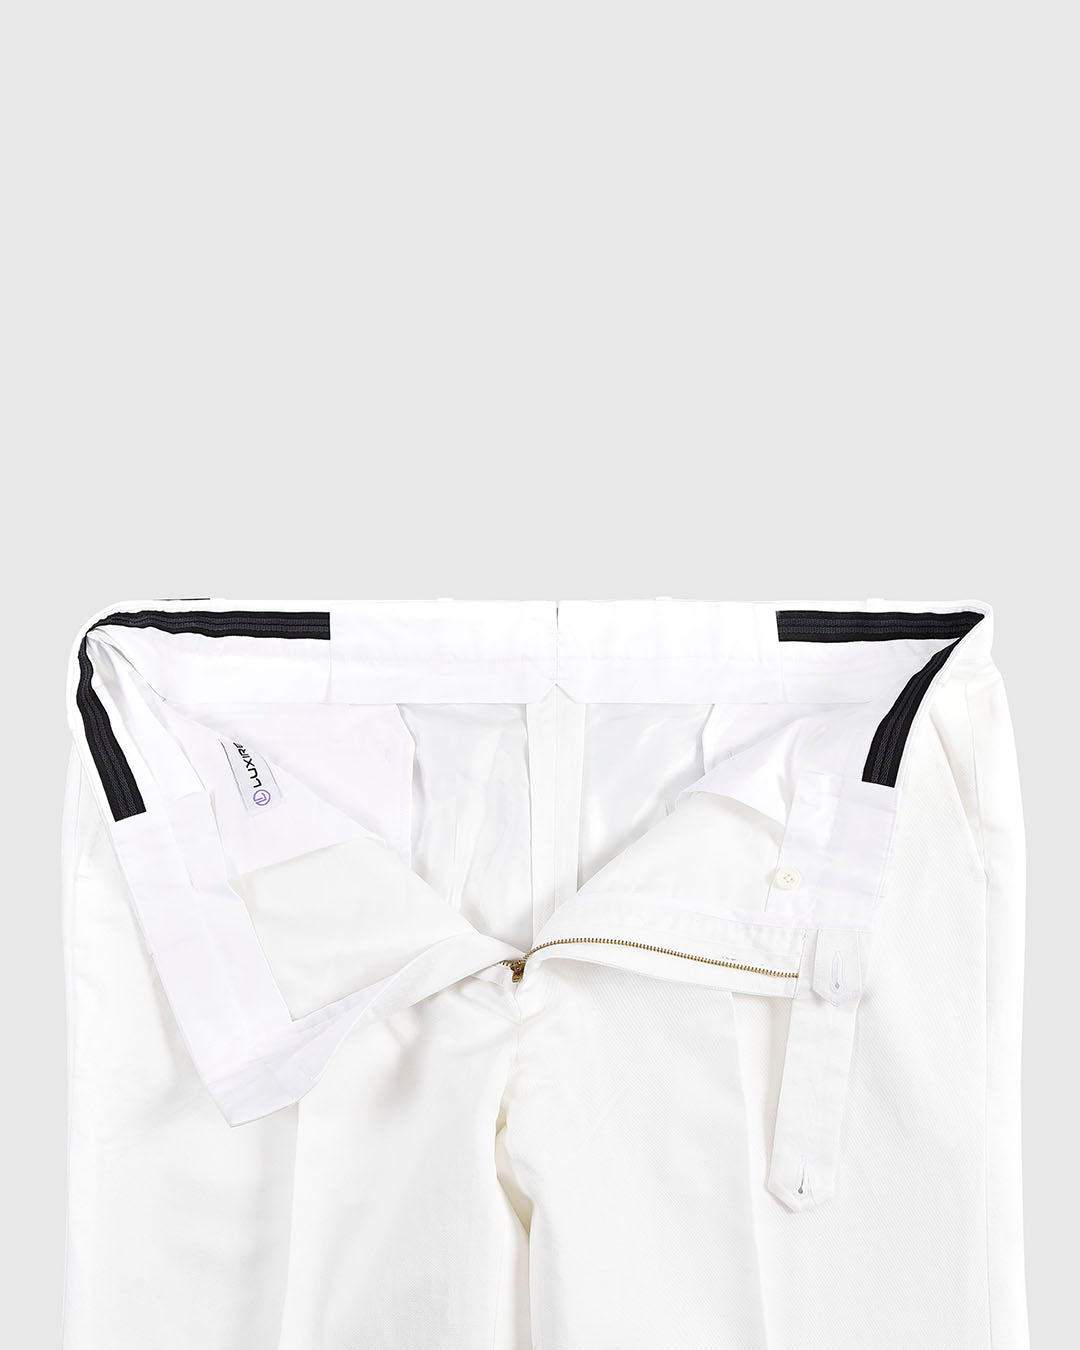 Front open view of custom linen pants for men by Luxire in white